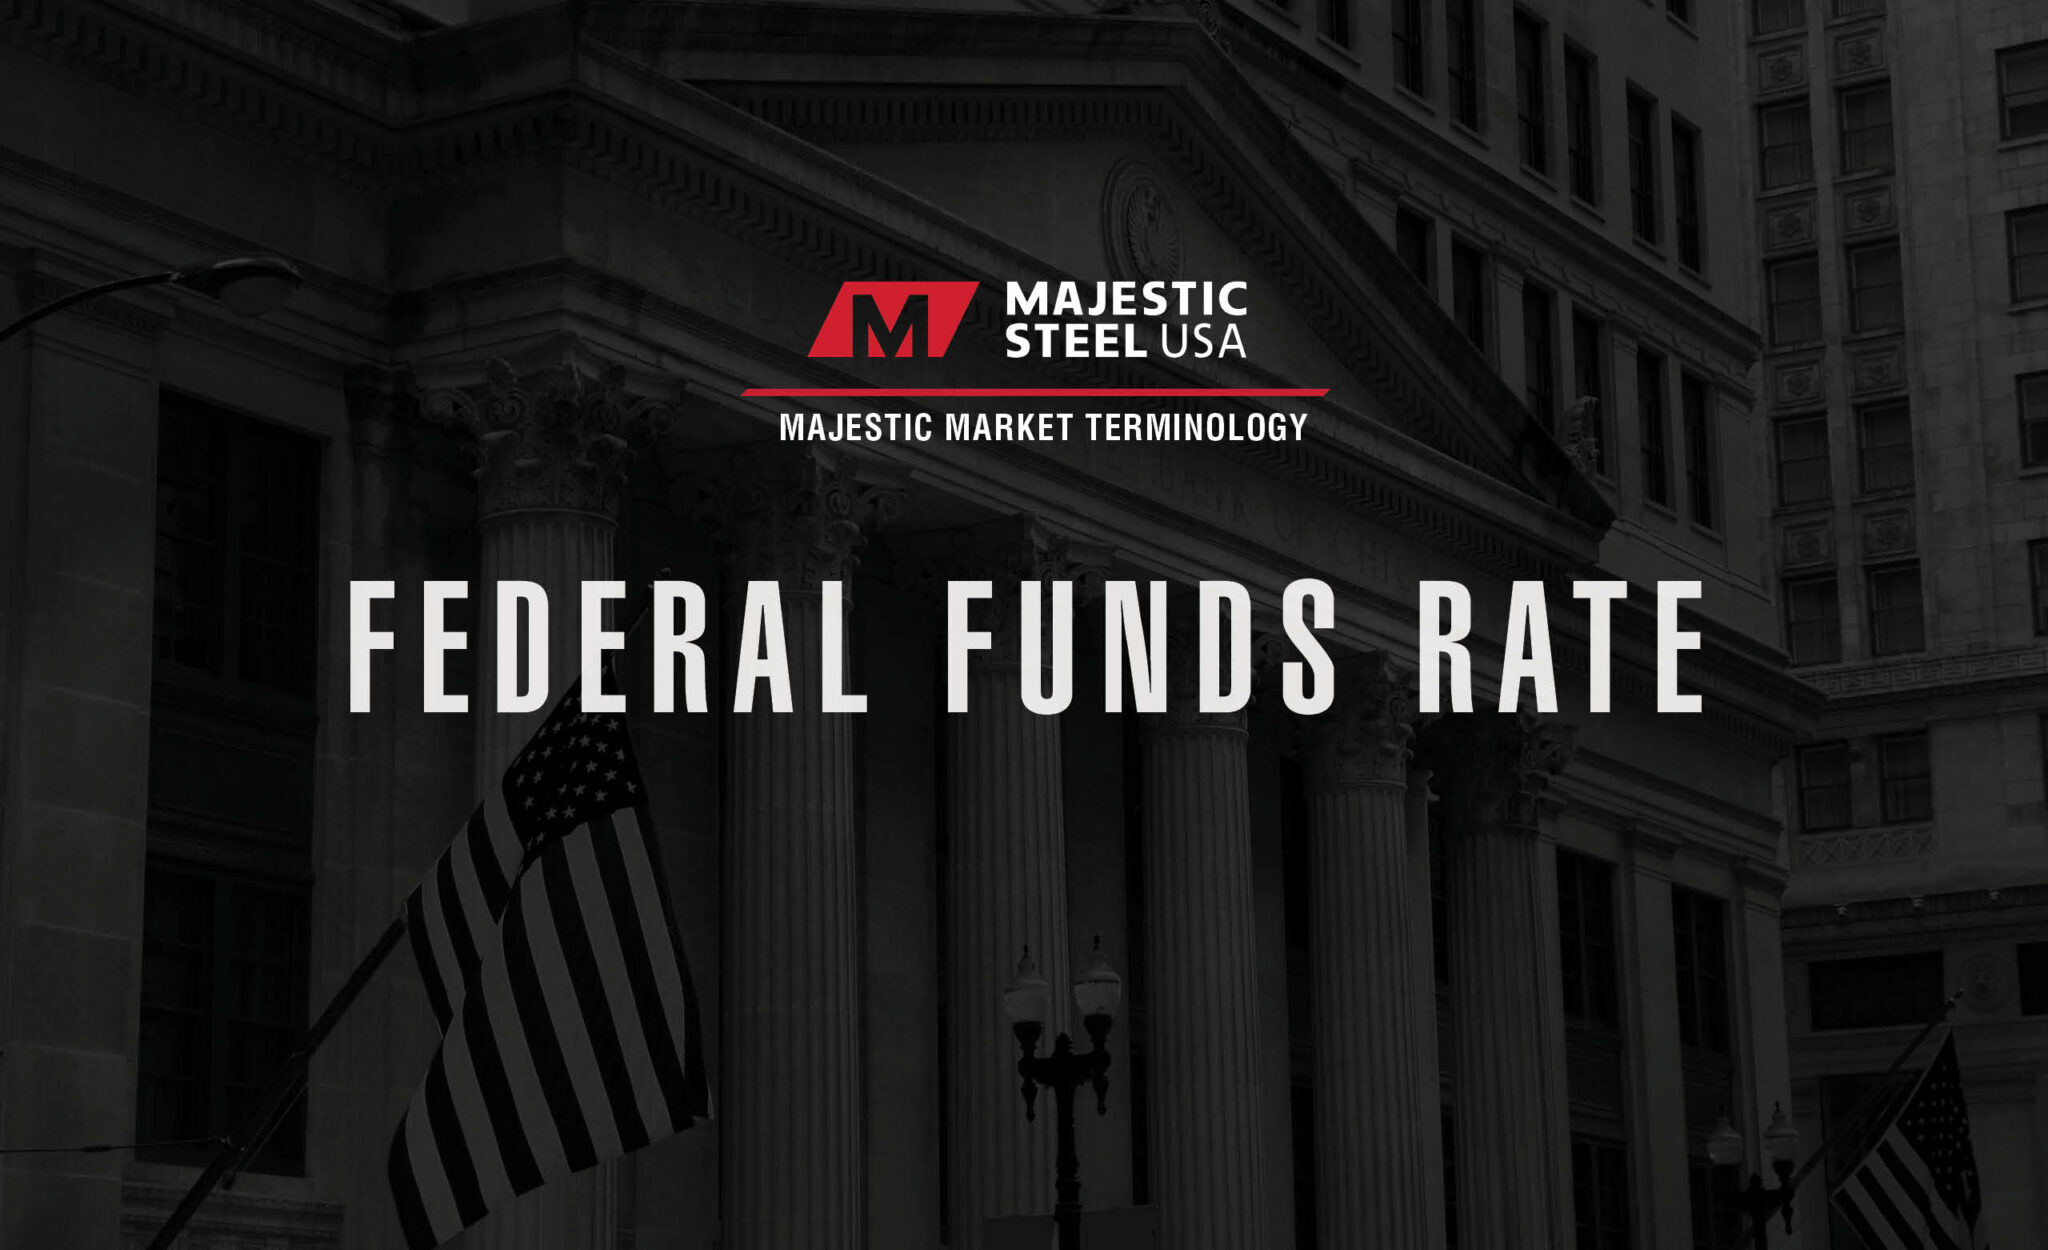 WHAT IS THE VALUE OF THE FEDERAL FUNDS RATE? Majestic Steel USA